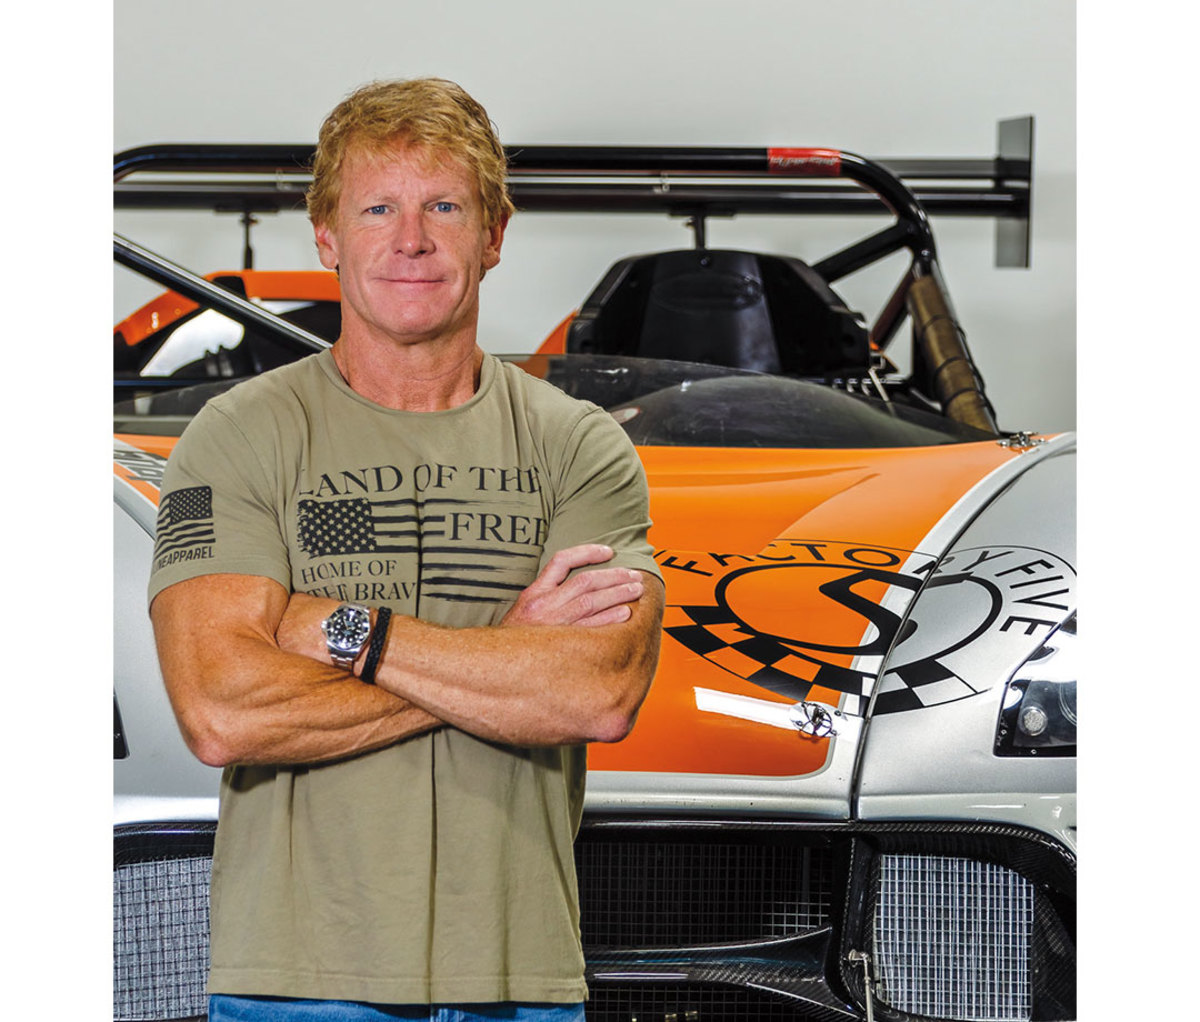 Caucasian man with strawberry blonde hair poses with arms across chest in front of sports car